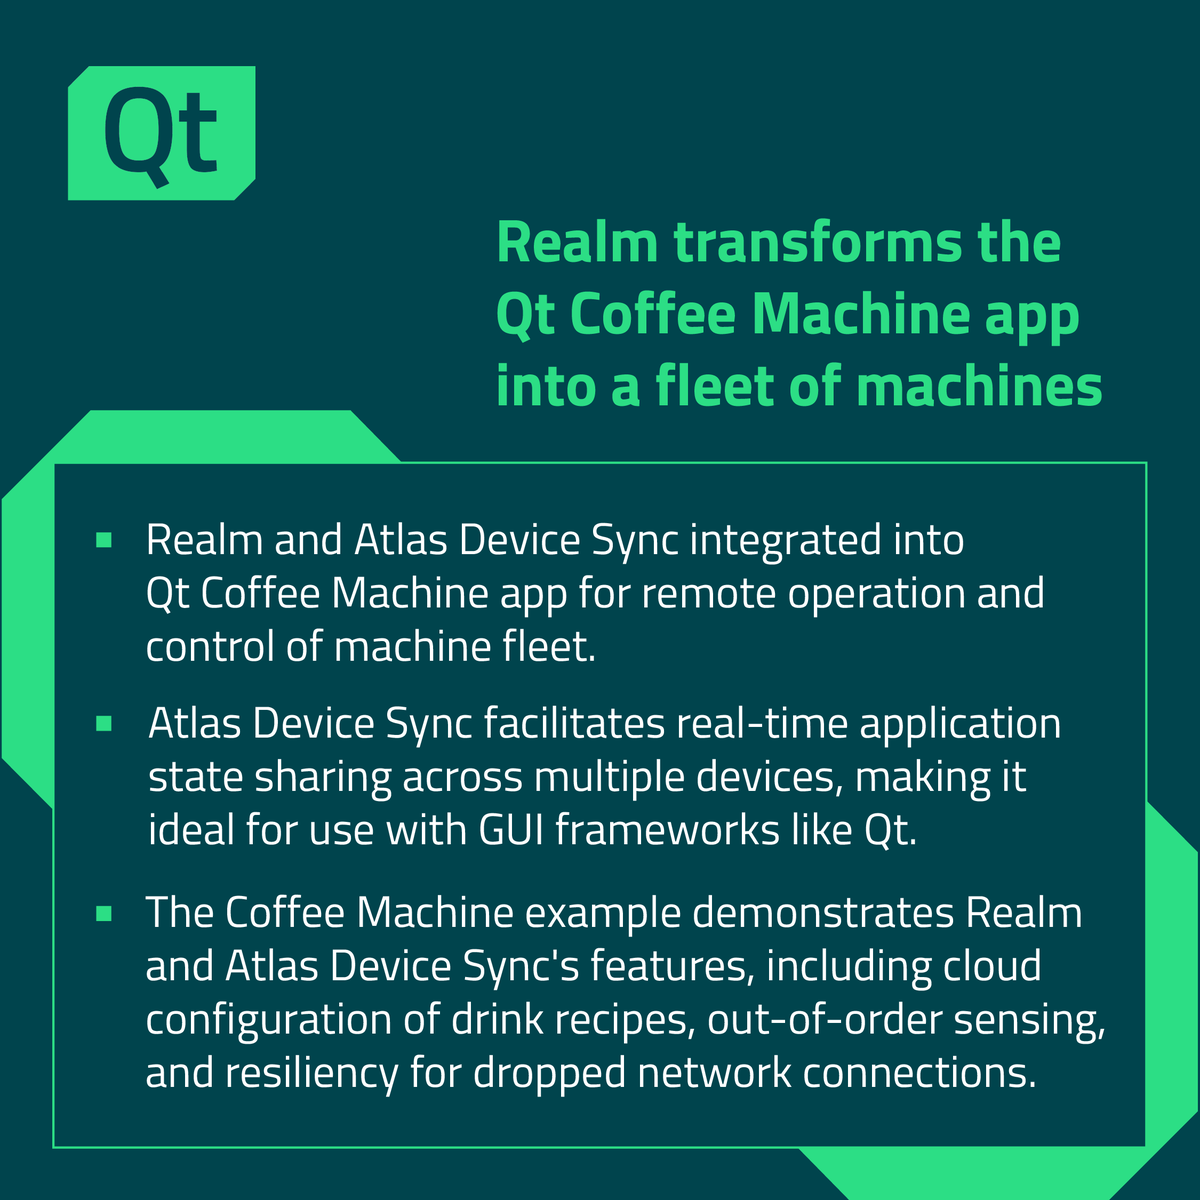 In collaboration with @MongoDB's team, Realm, and Atlas Device Sync was integrated into the Qt Coffee Machine application. Learn about the benefits and view the source code: hubs.li/Q01Nty5s0 #qtdev #IoT #integration #developer #applicationdevelopment